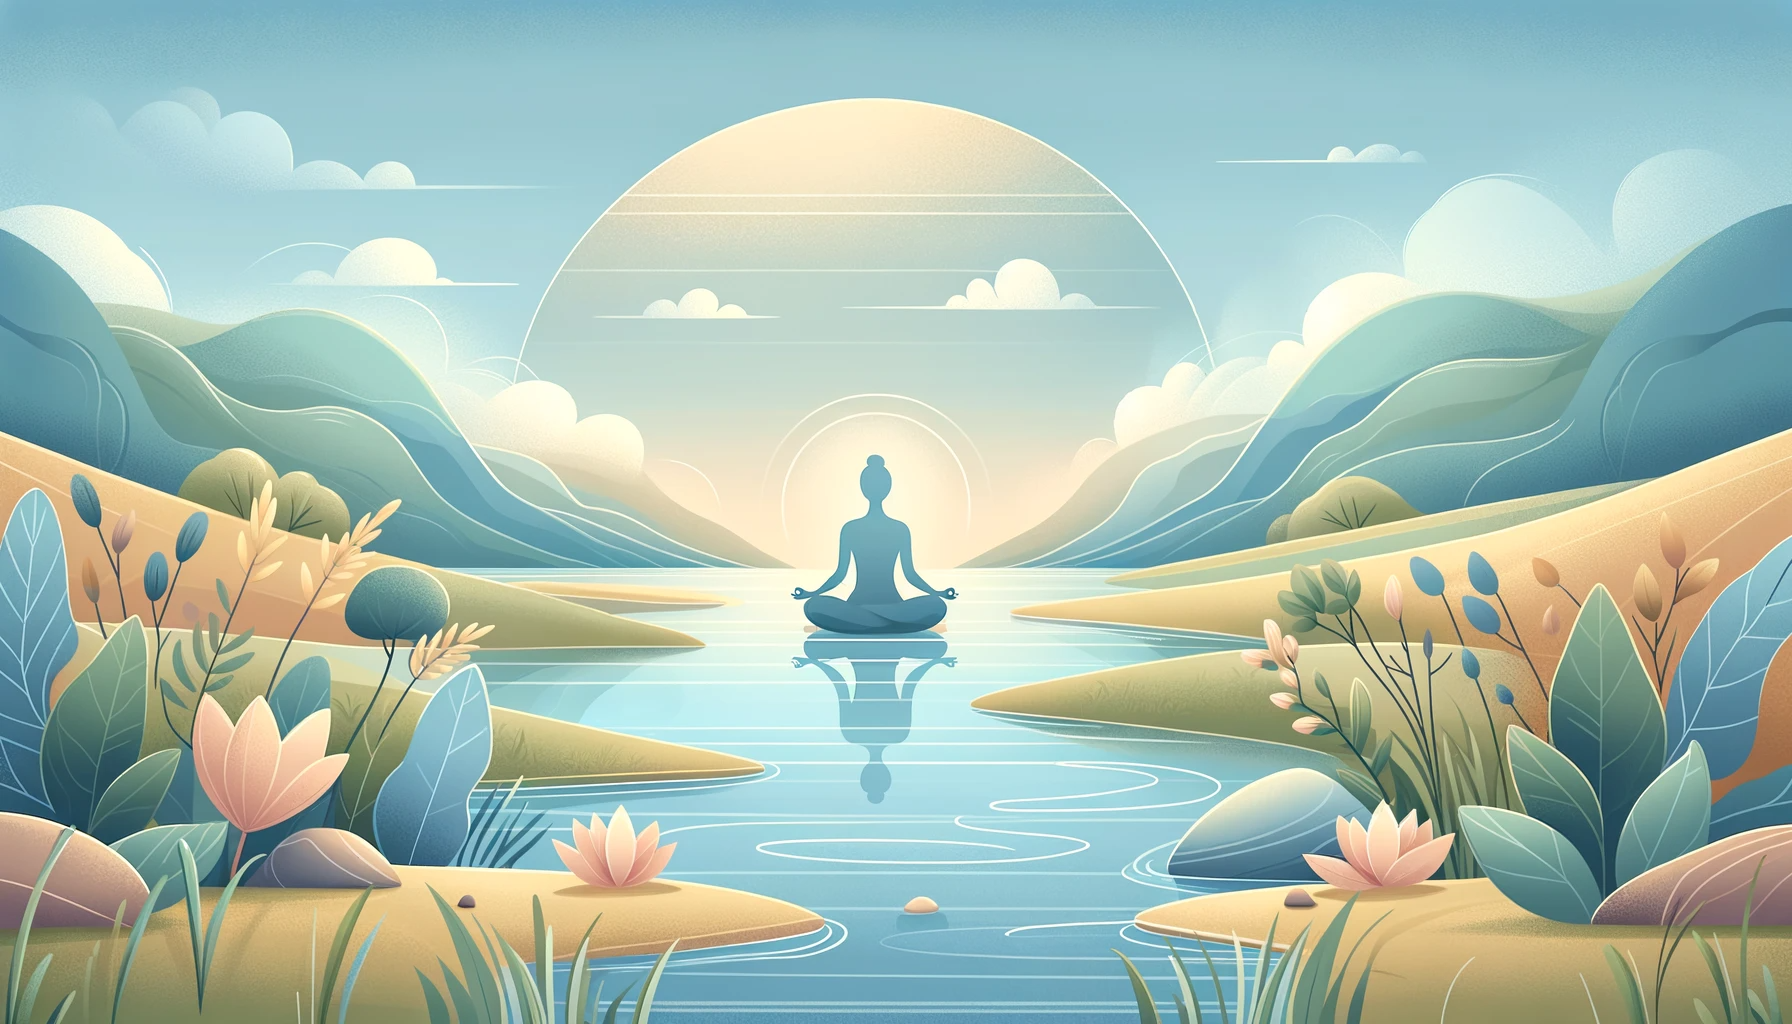 The image depicts a serene landscape with a calm lake and gentle rolling hills in the background under a clear blue sky. In the foreground, there's an individual sitting in a lotus position meditating, surrounded by a faint aura of soft light, symbolizing inner peace. The colors are soft and muted, enhancing the sense of calmness. The blog post title is elegantly displayed at the top in easy-to-read typography.